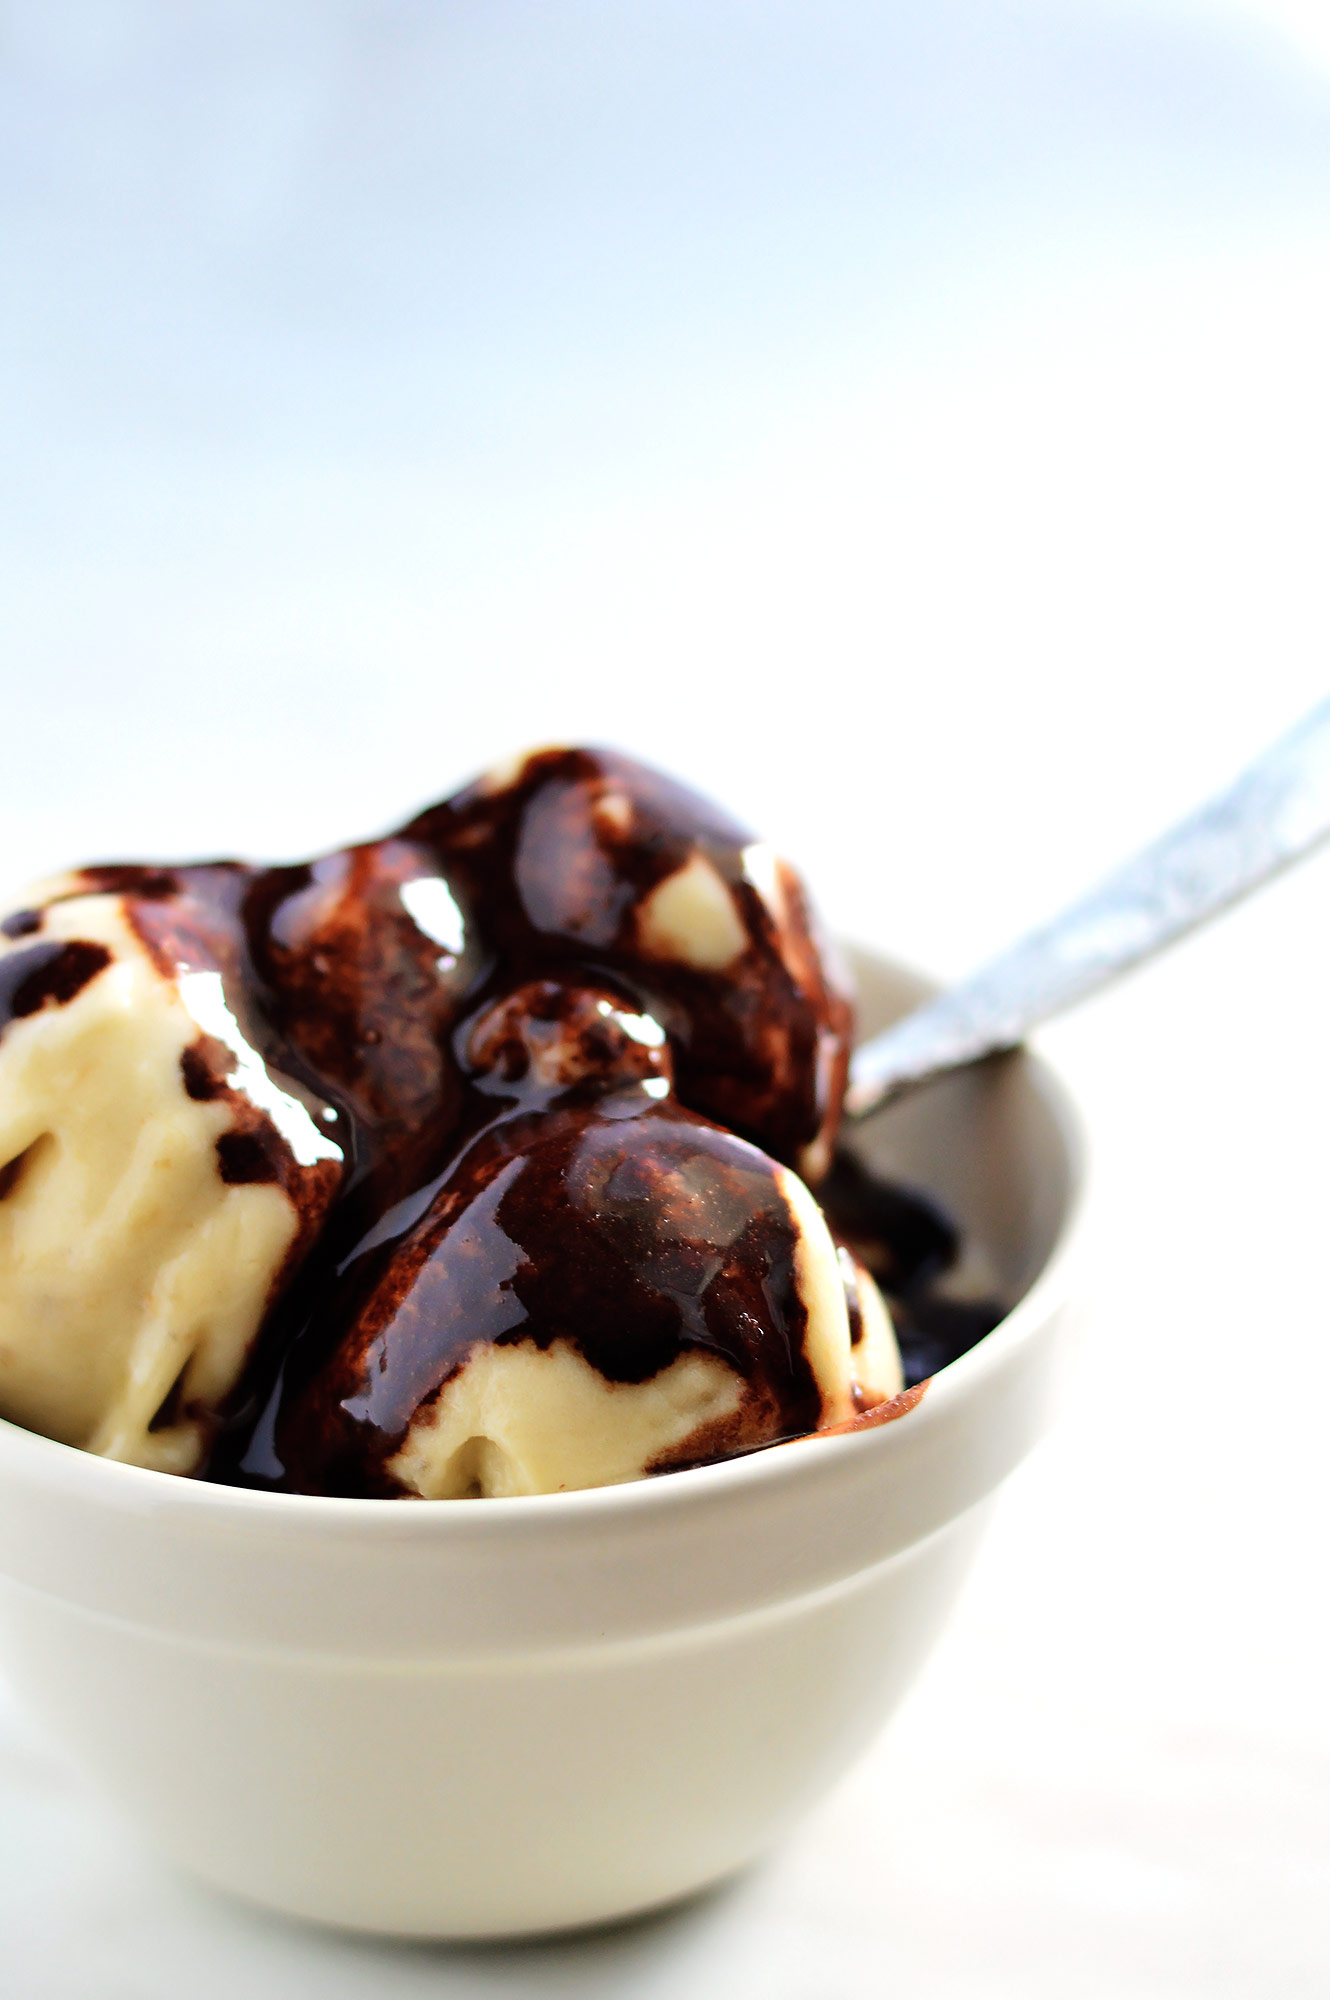 Banana Icecream with Carob Syrup - high in nutritients and low in fat! |www.thebrightbird.com